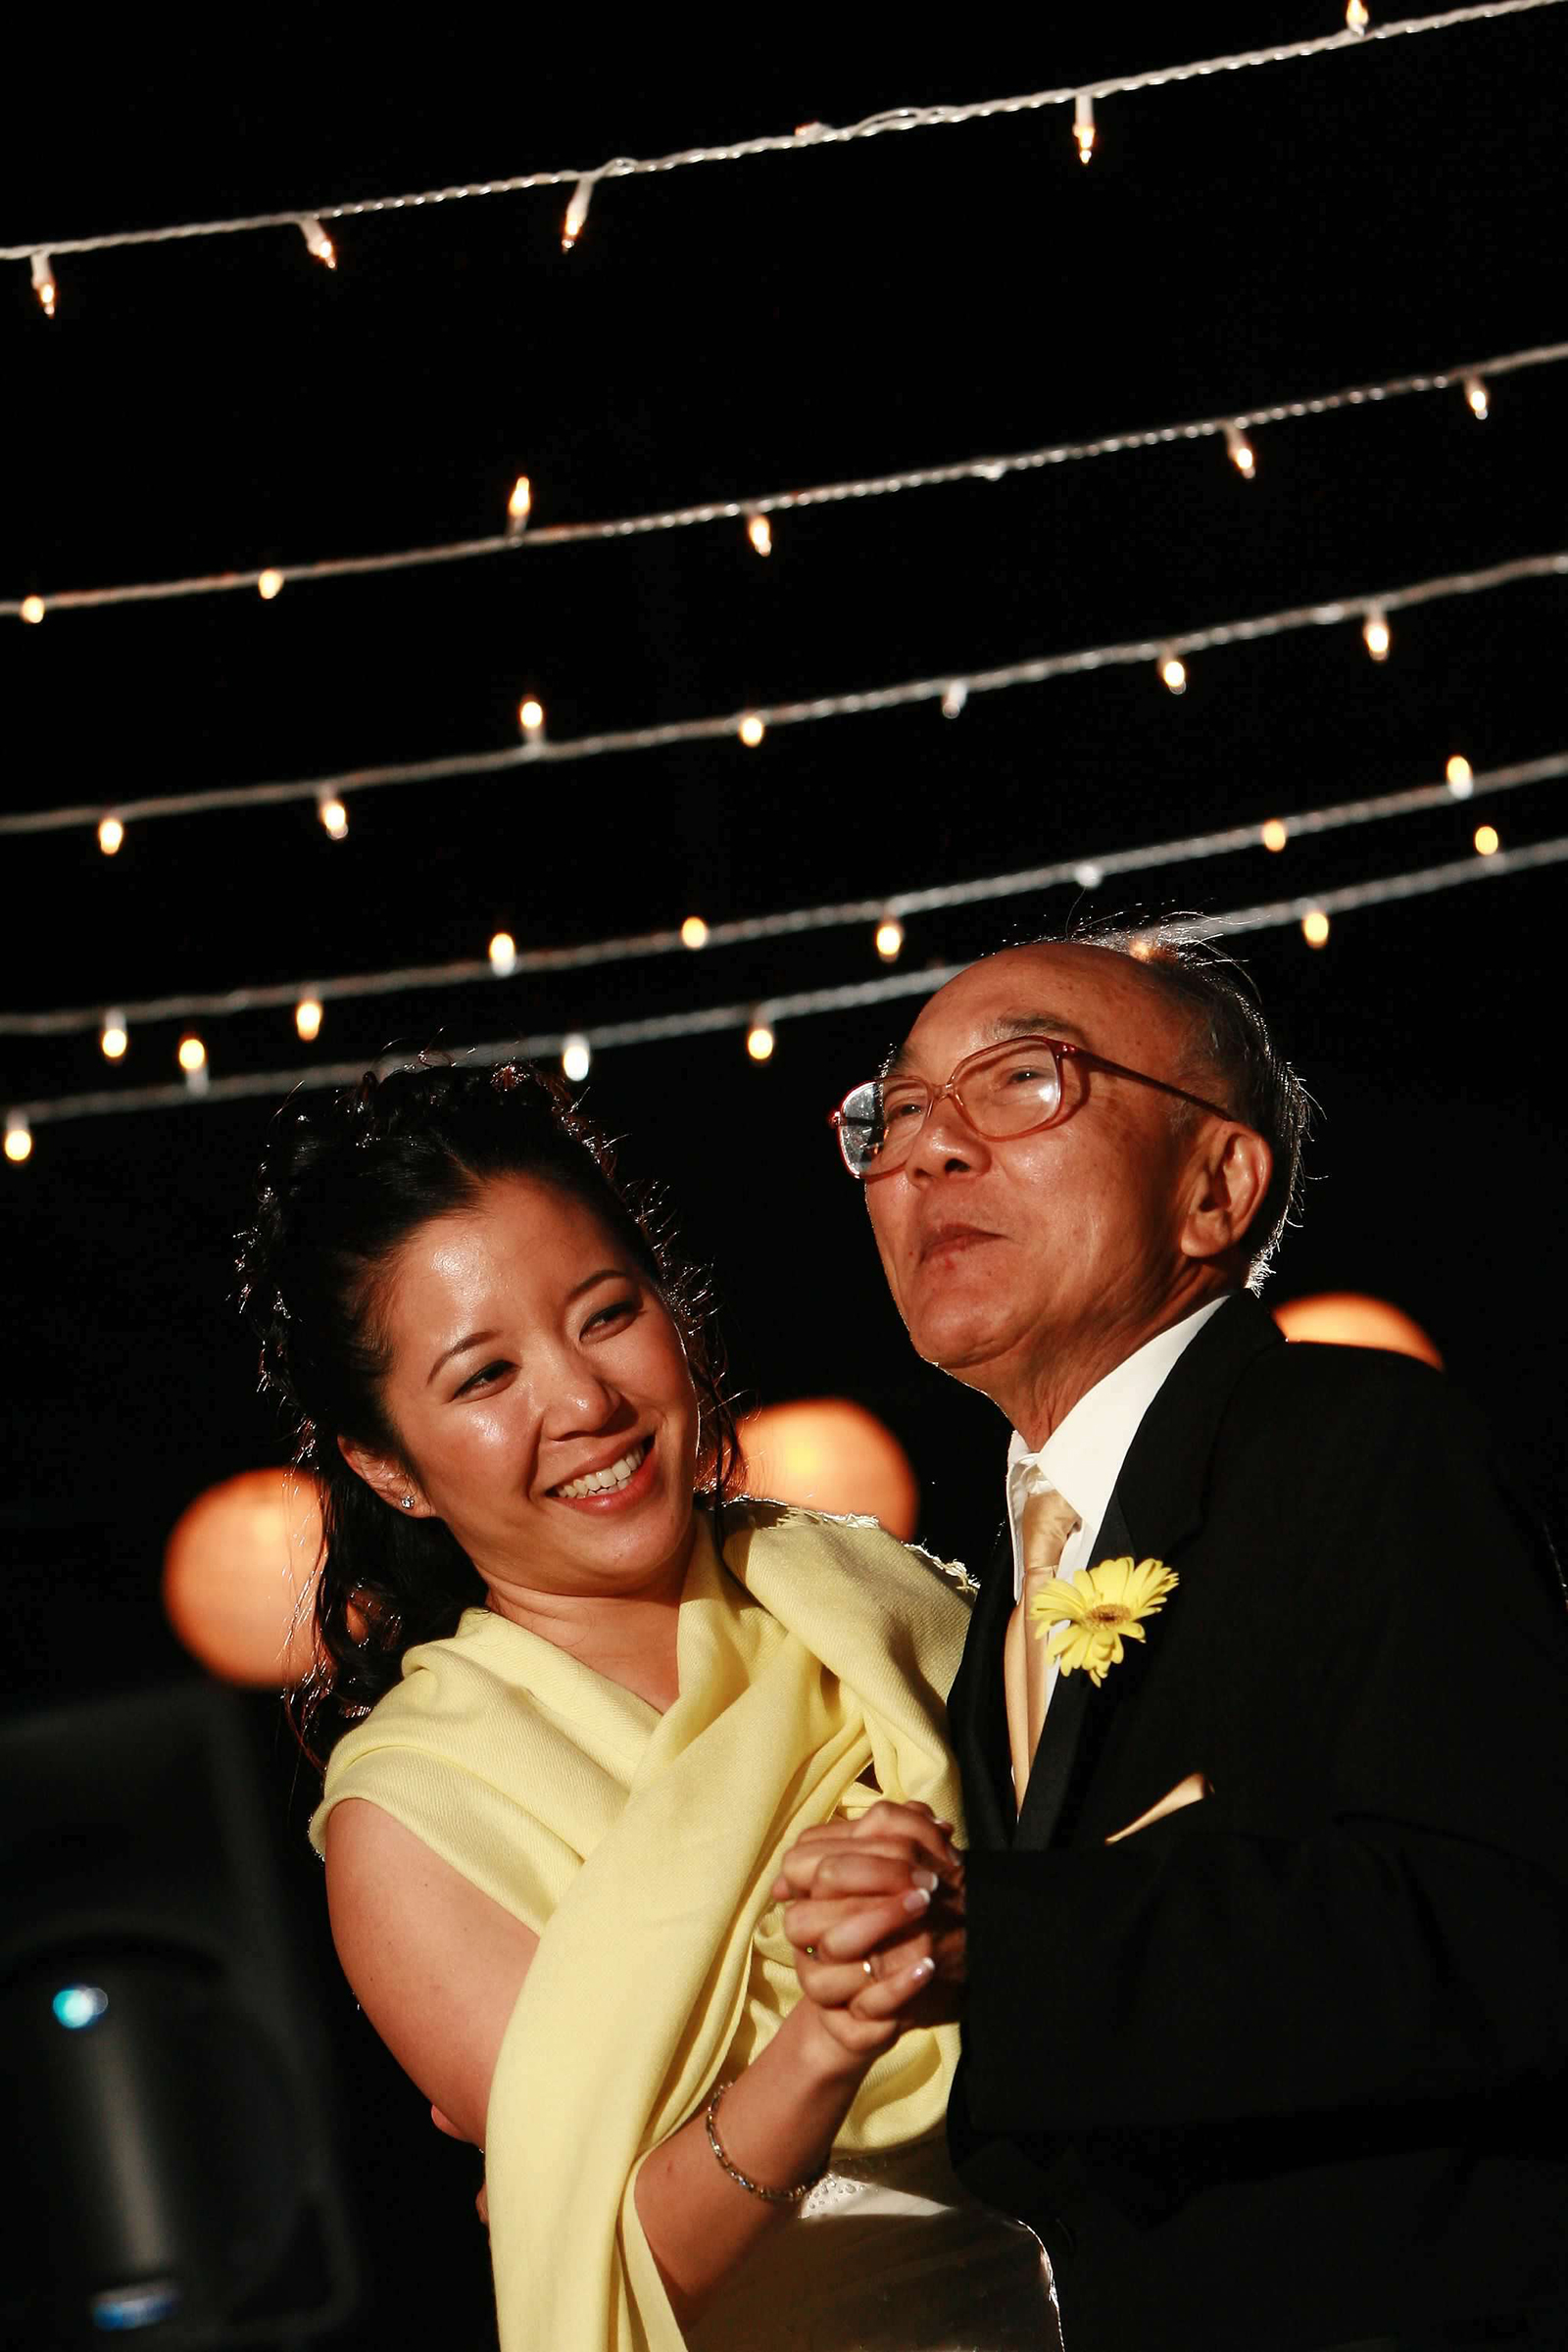 What Dancing Means to Asian American Elders Like My Parents